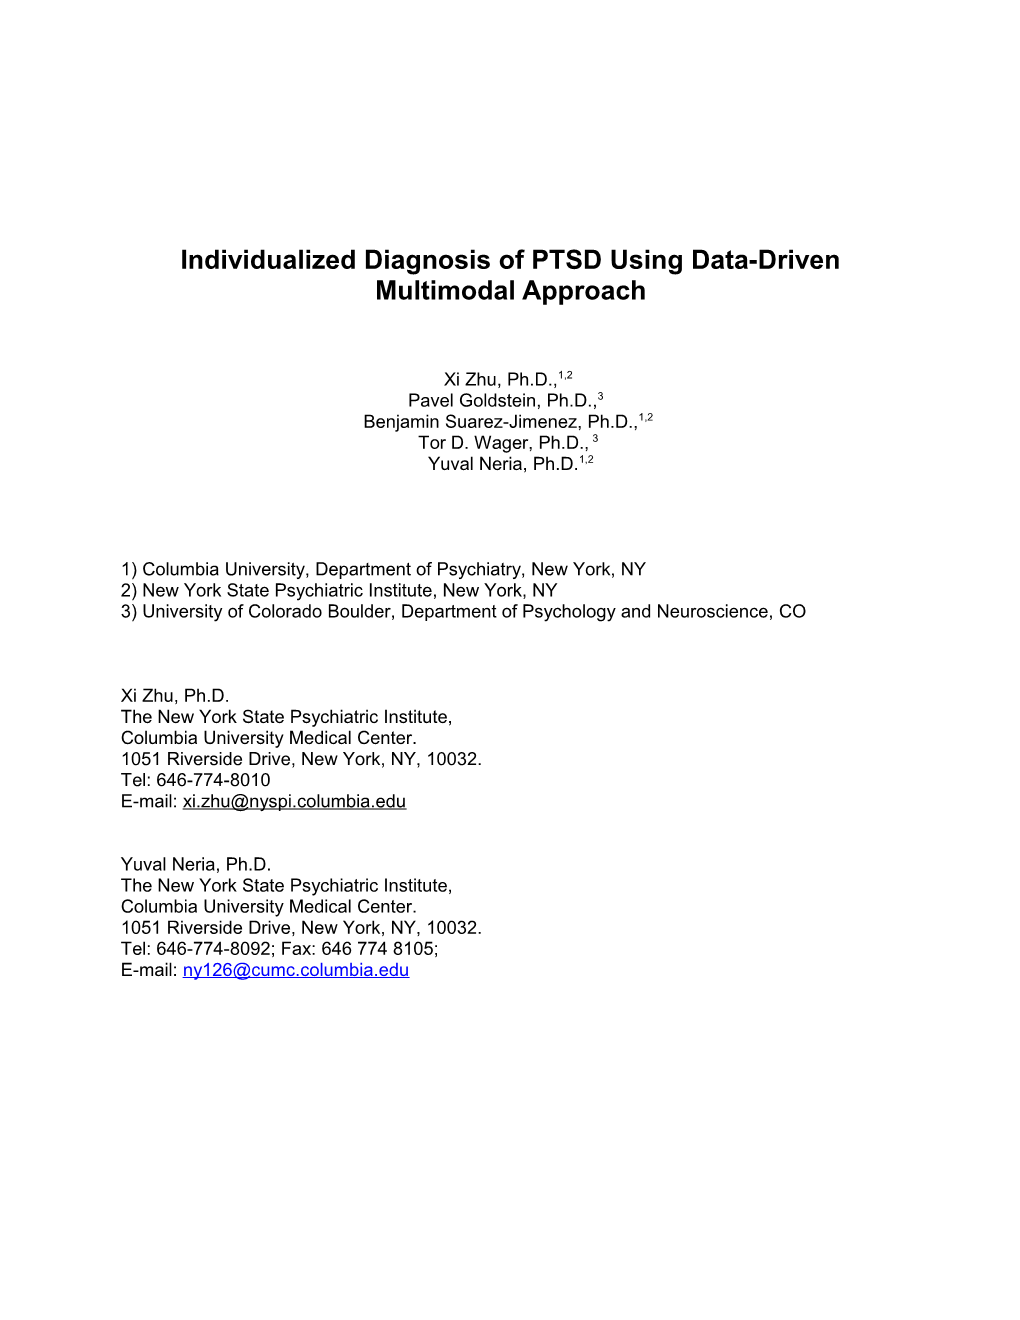 Individualized Diagnosis of PTSD Using Data-Driven Multimodal Approach